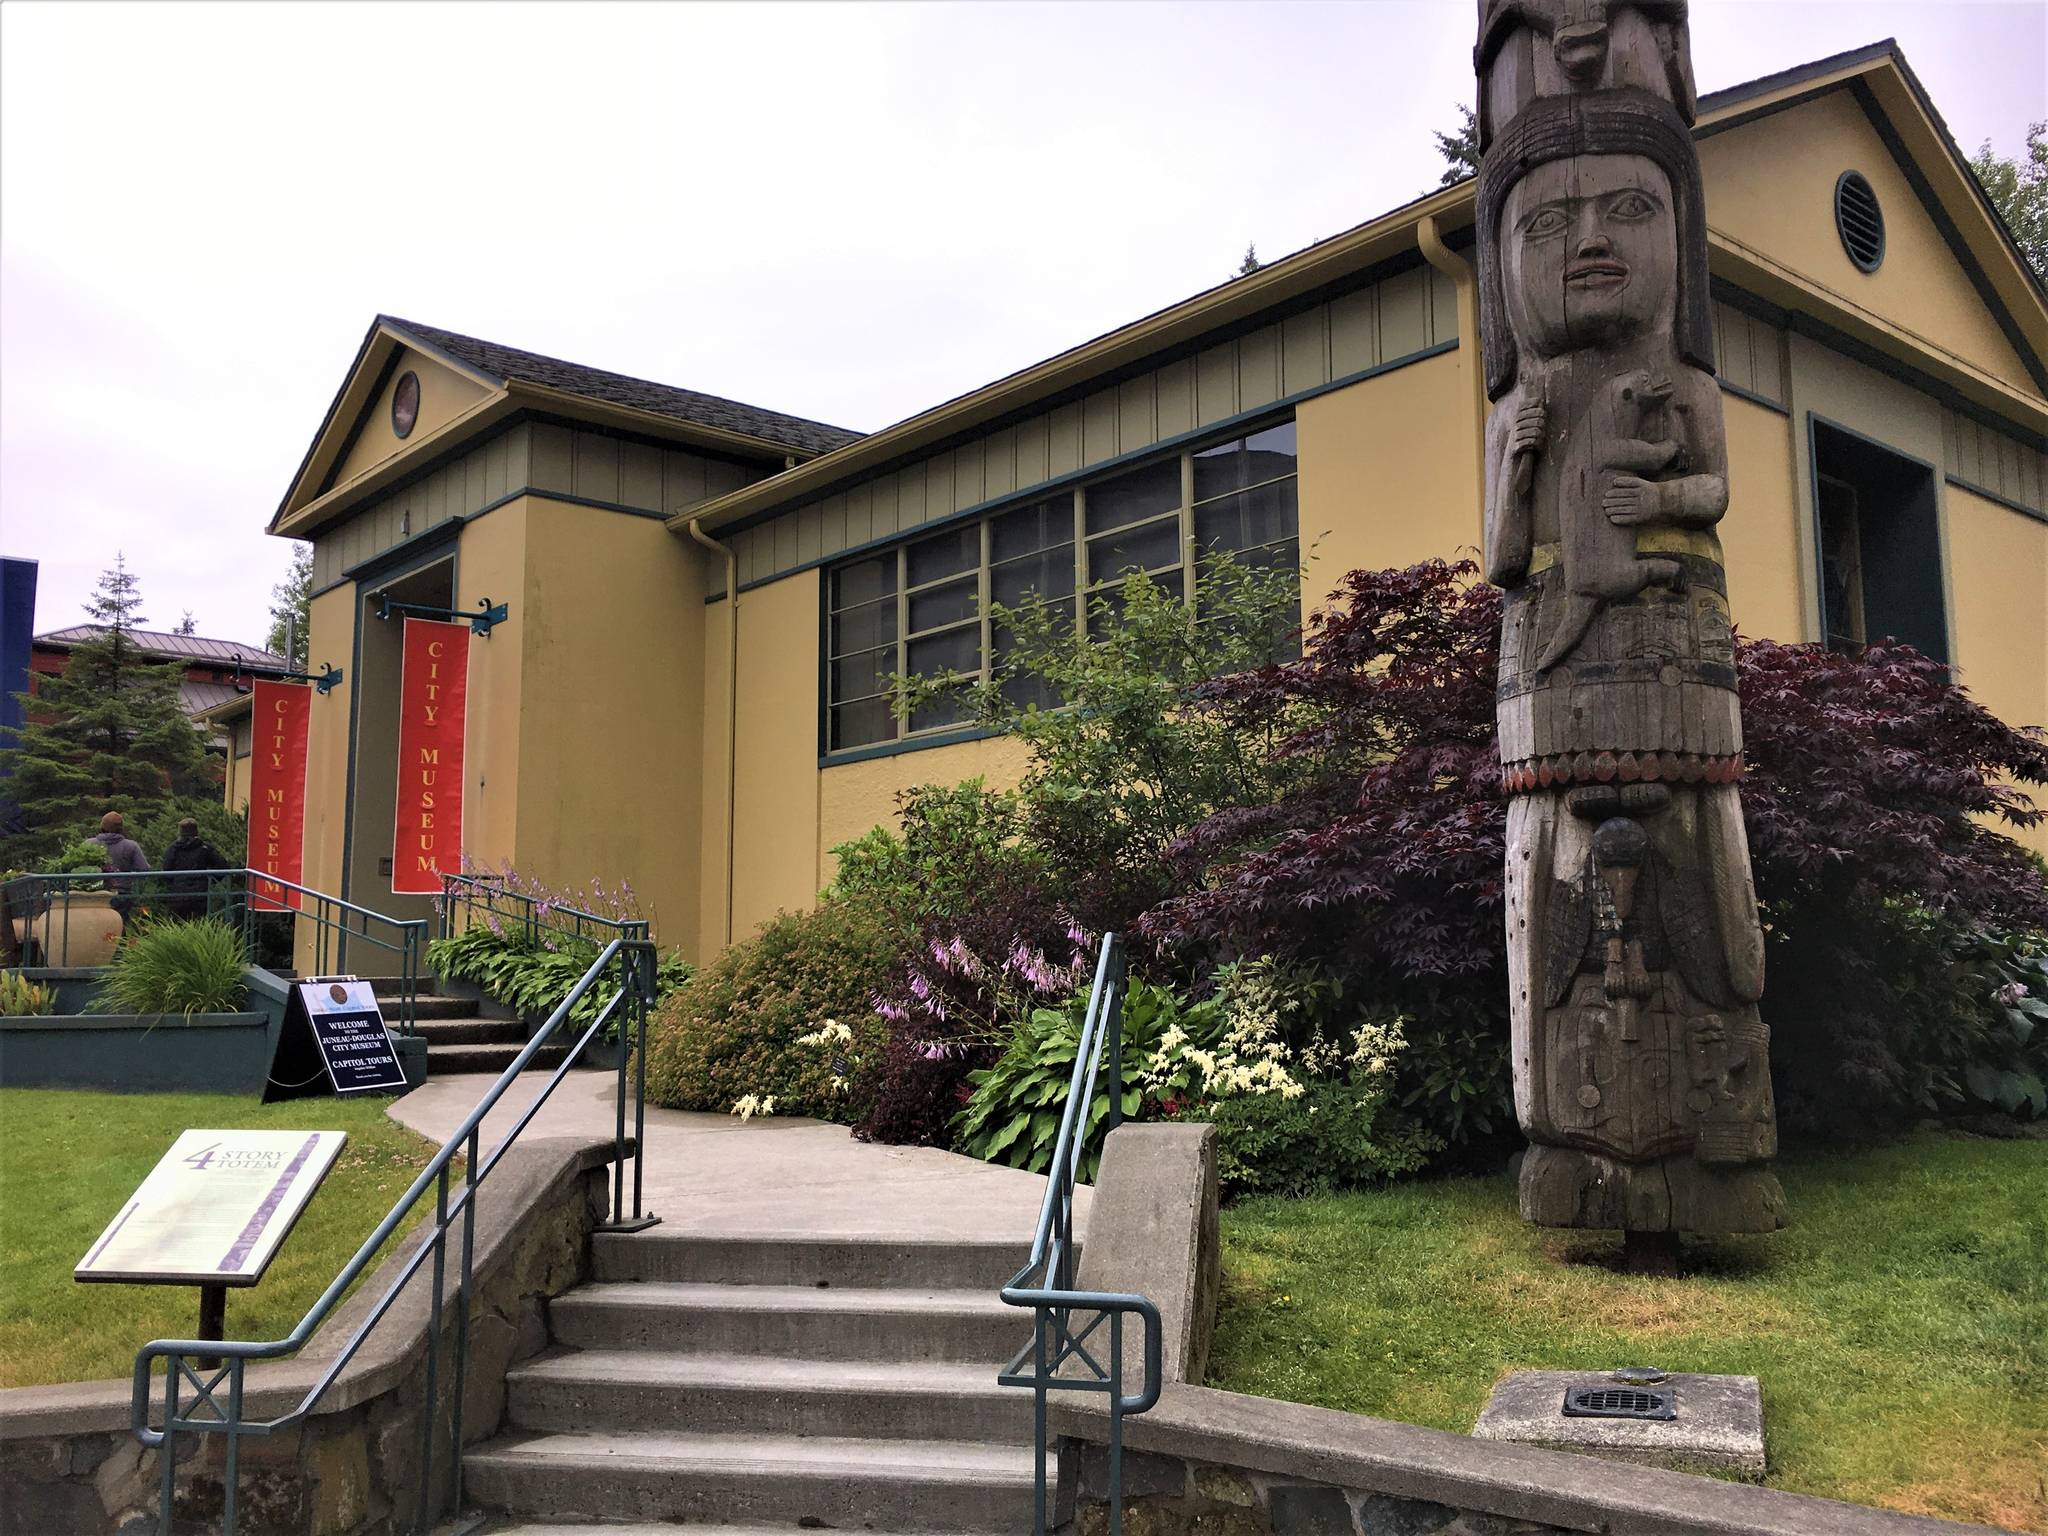 The Juneau-Douglas City Museum offers free admission for First Friday and will display its continuing exhibit “The Rhythm of Winter.” (Courtesy Photo | Juneau-Douglas City Museum)